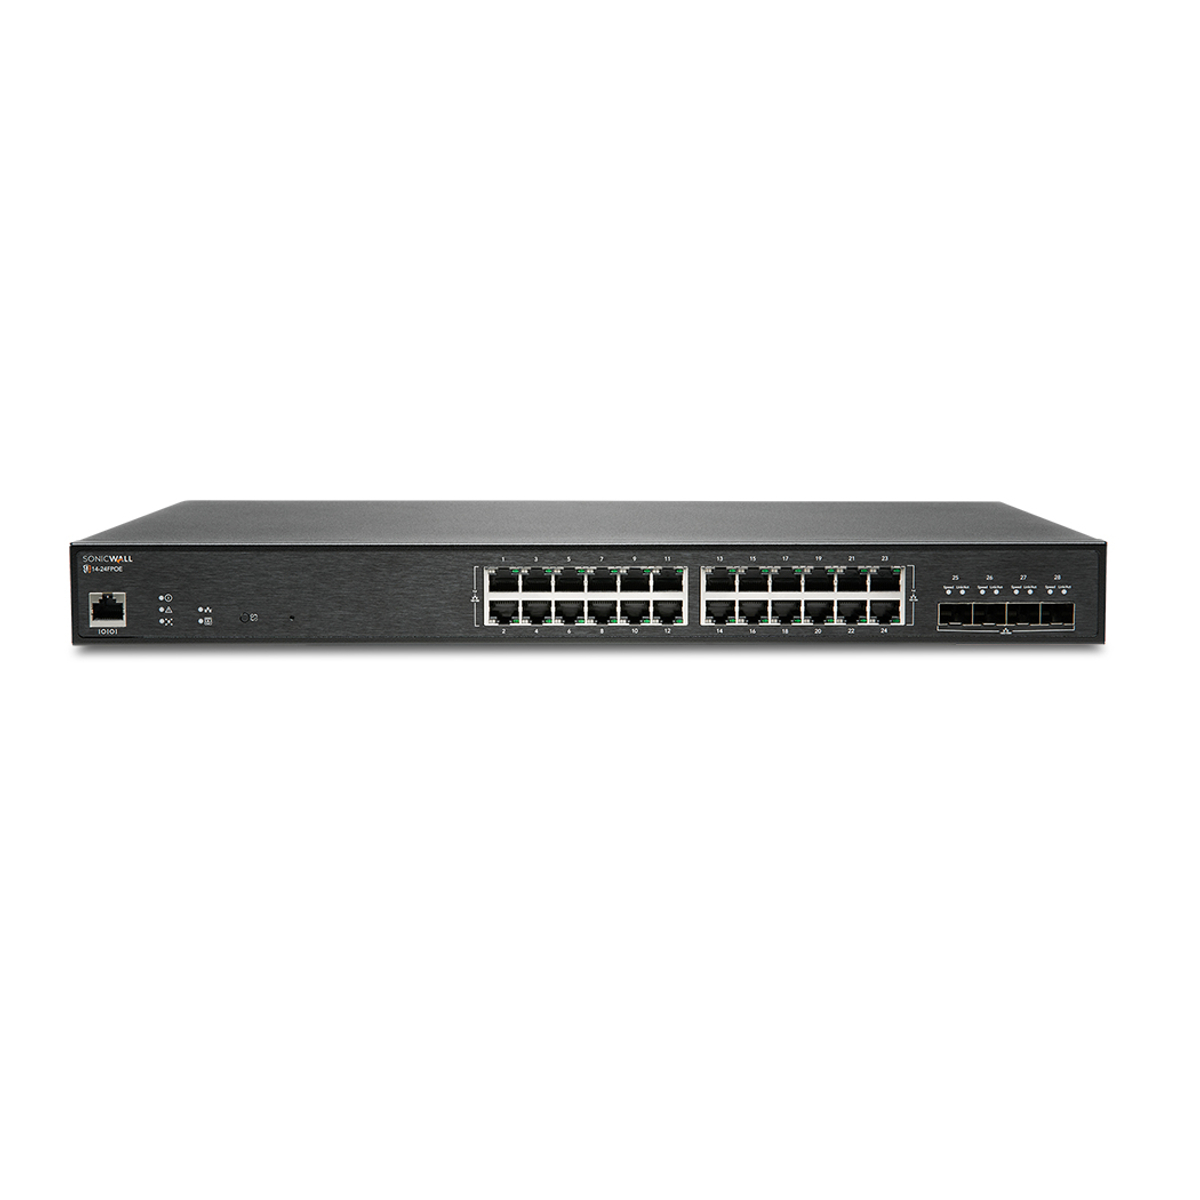 SWITCH SWS14-24FPOE WITH SUPPORT 3YR